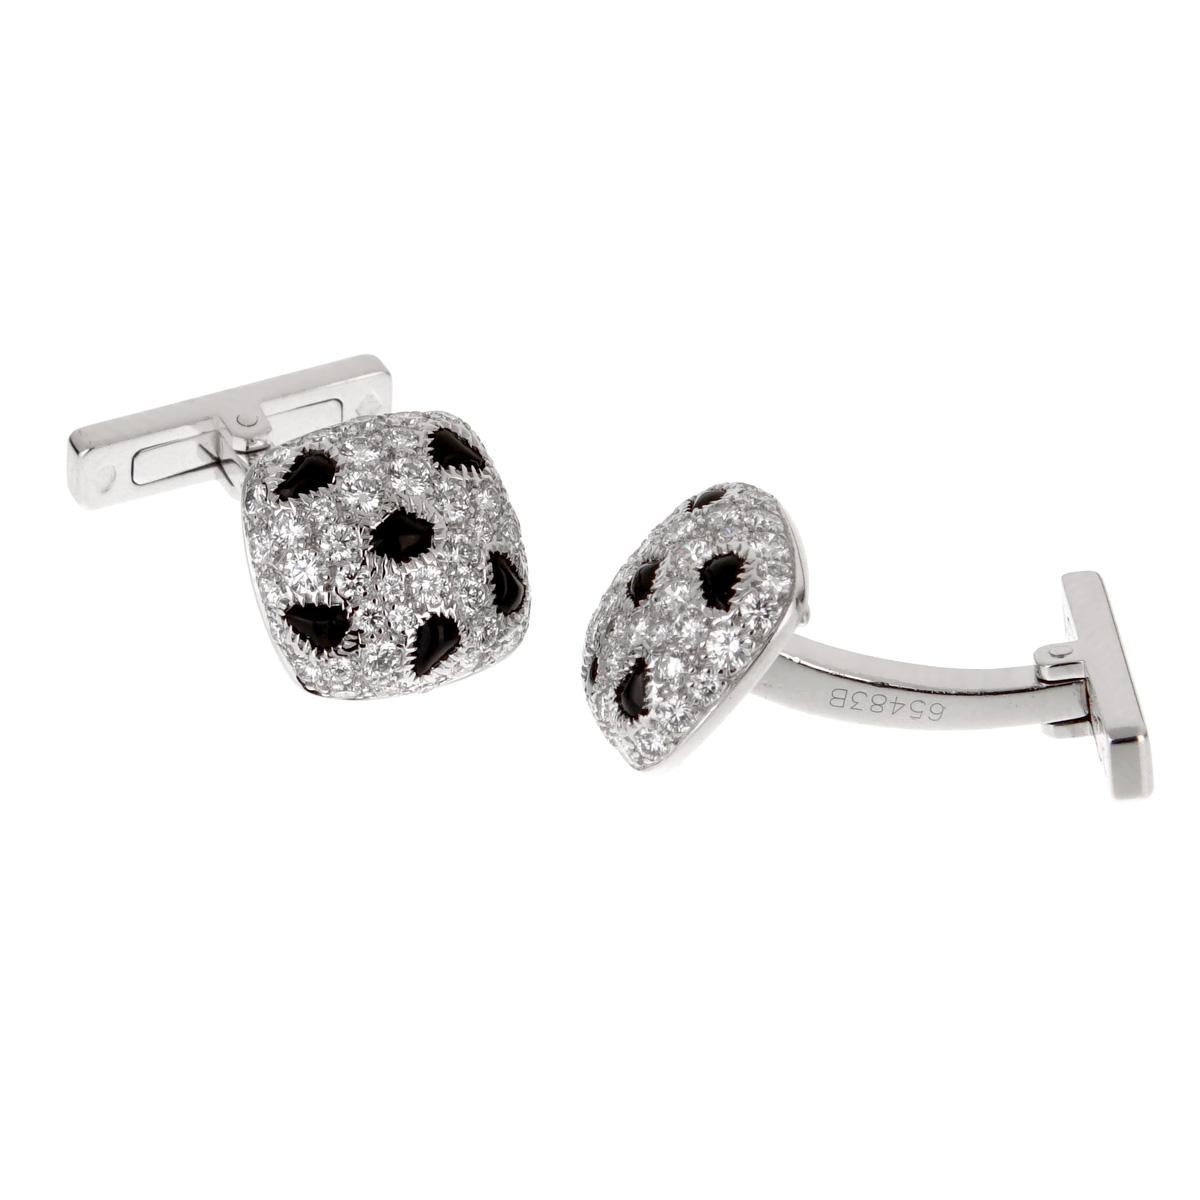 An iconic pair of Cartier Panthere cufflinks showcasing the finest Cartier round brilliant cut diamonds in shimmering 18k white gold with contrasting onyx.
